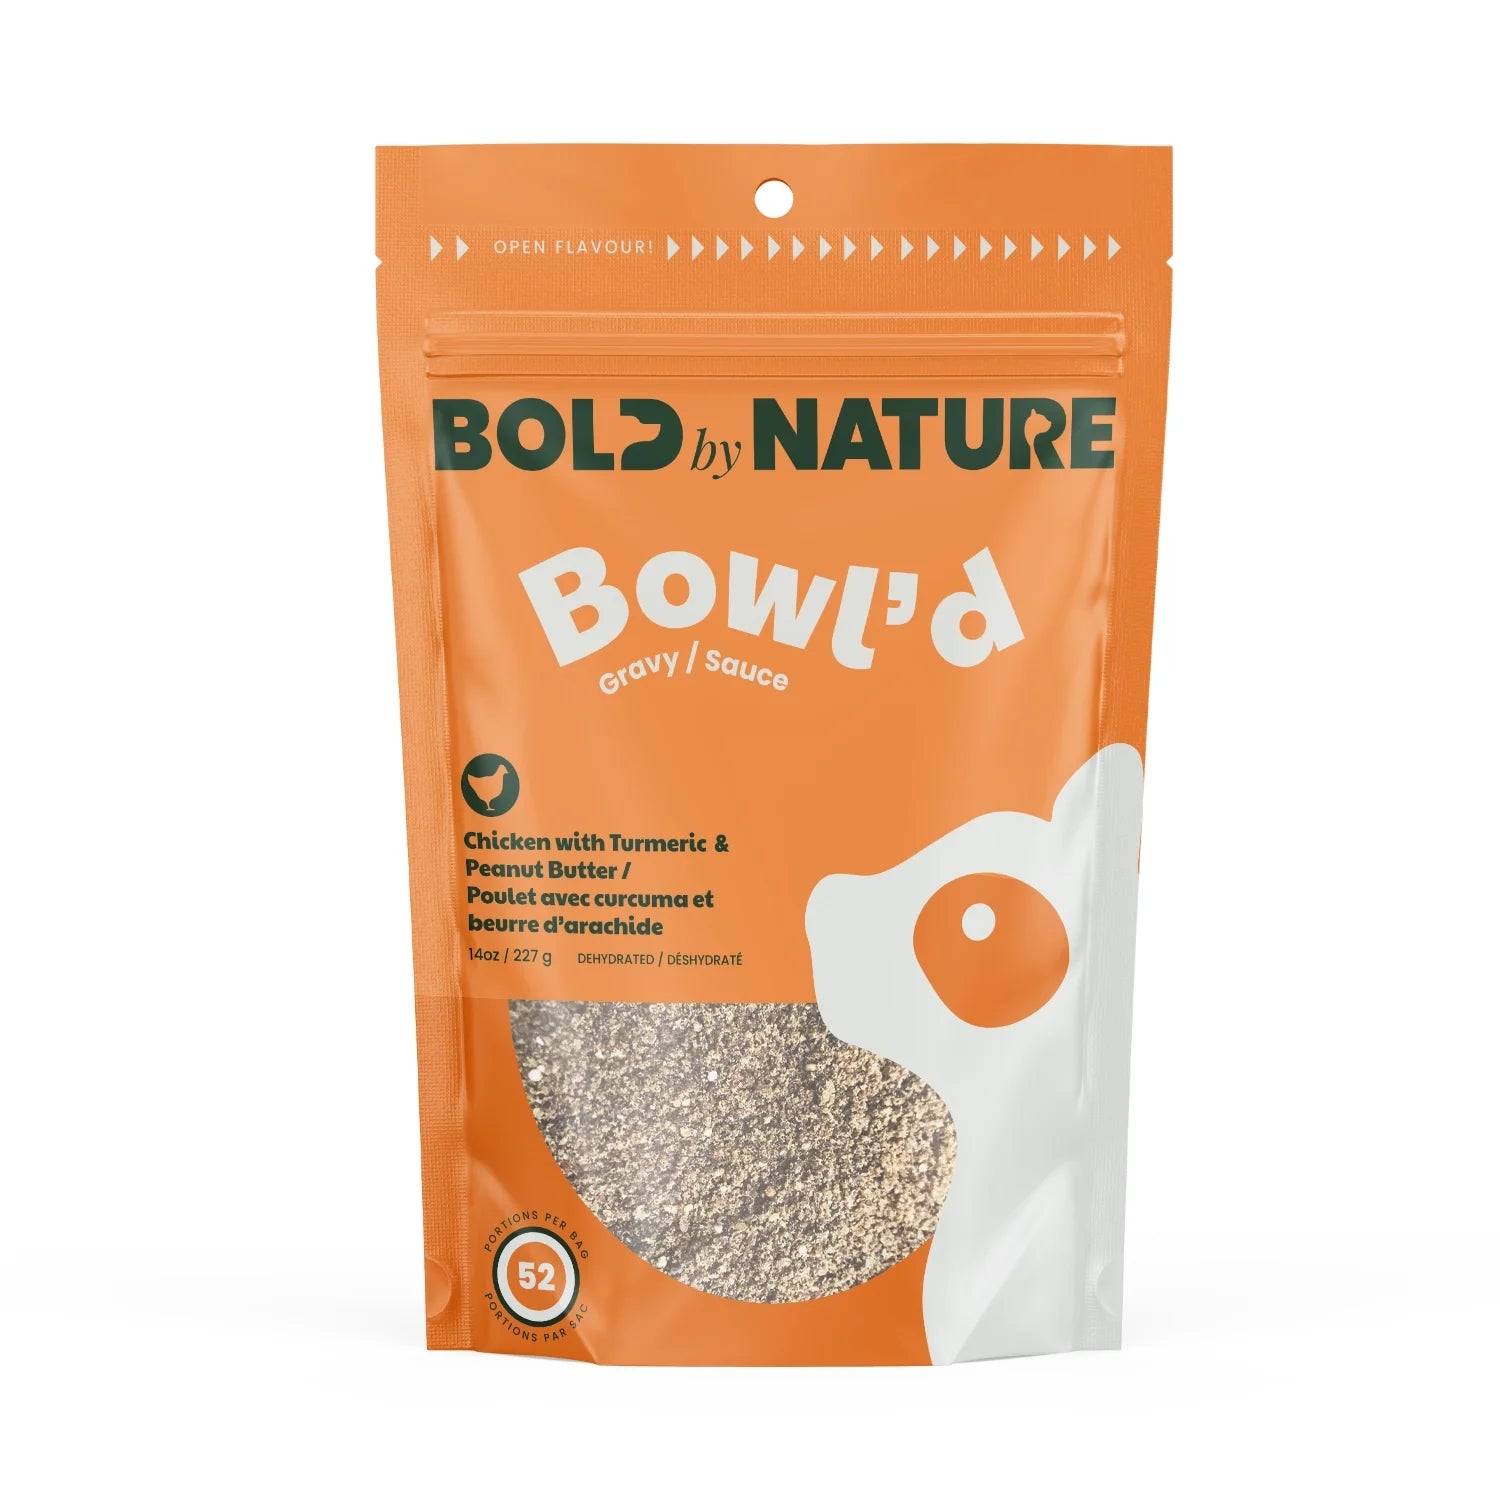 Bold by Nature - Bowl’d Dehydrated Gravy – Chicken with Turmeric & Peanut Butter (For Dogs)